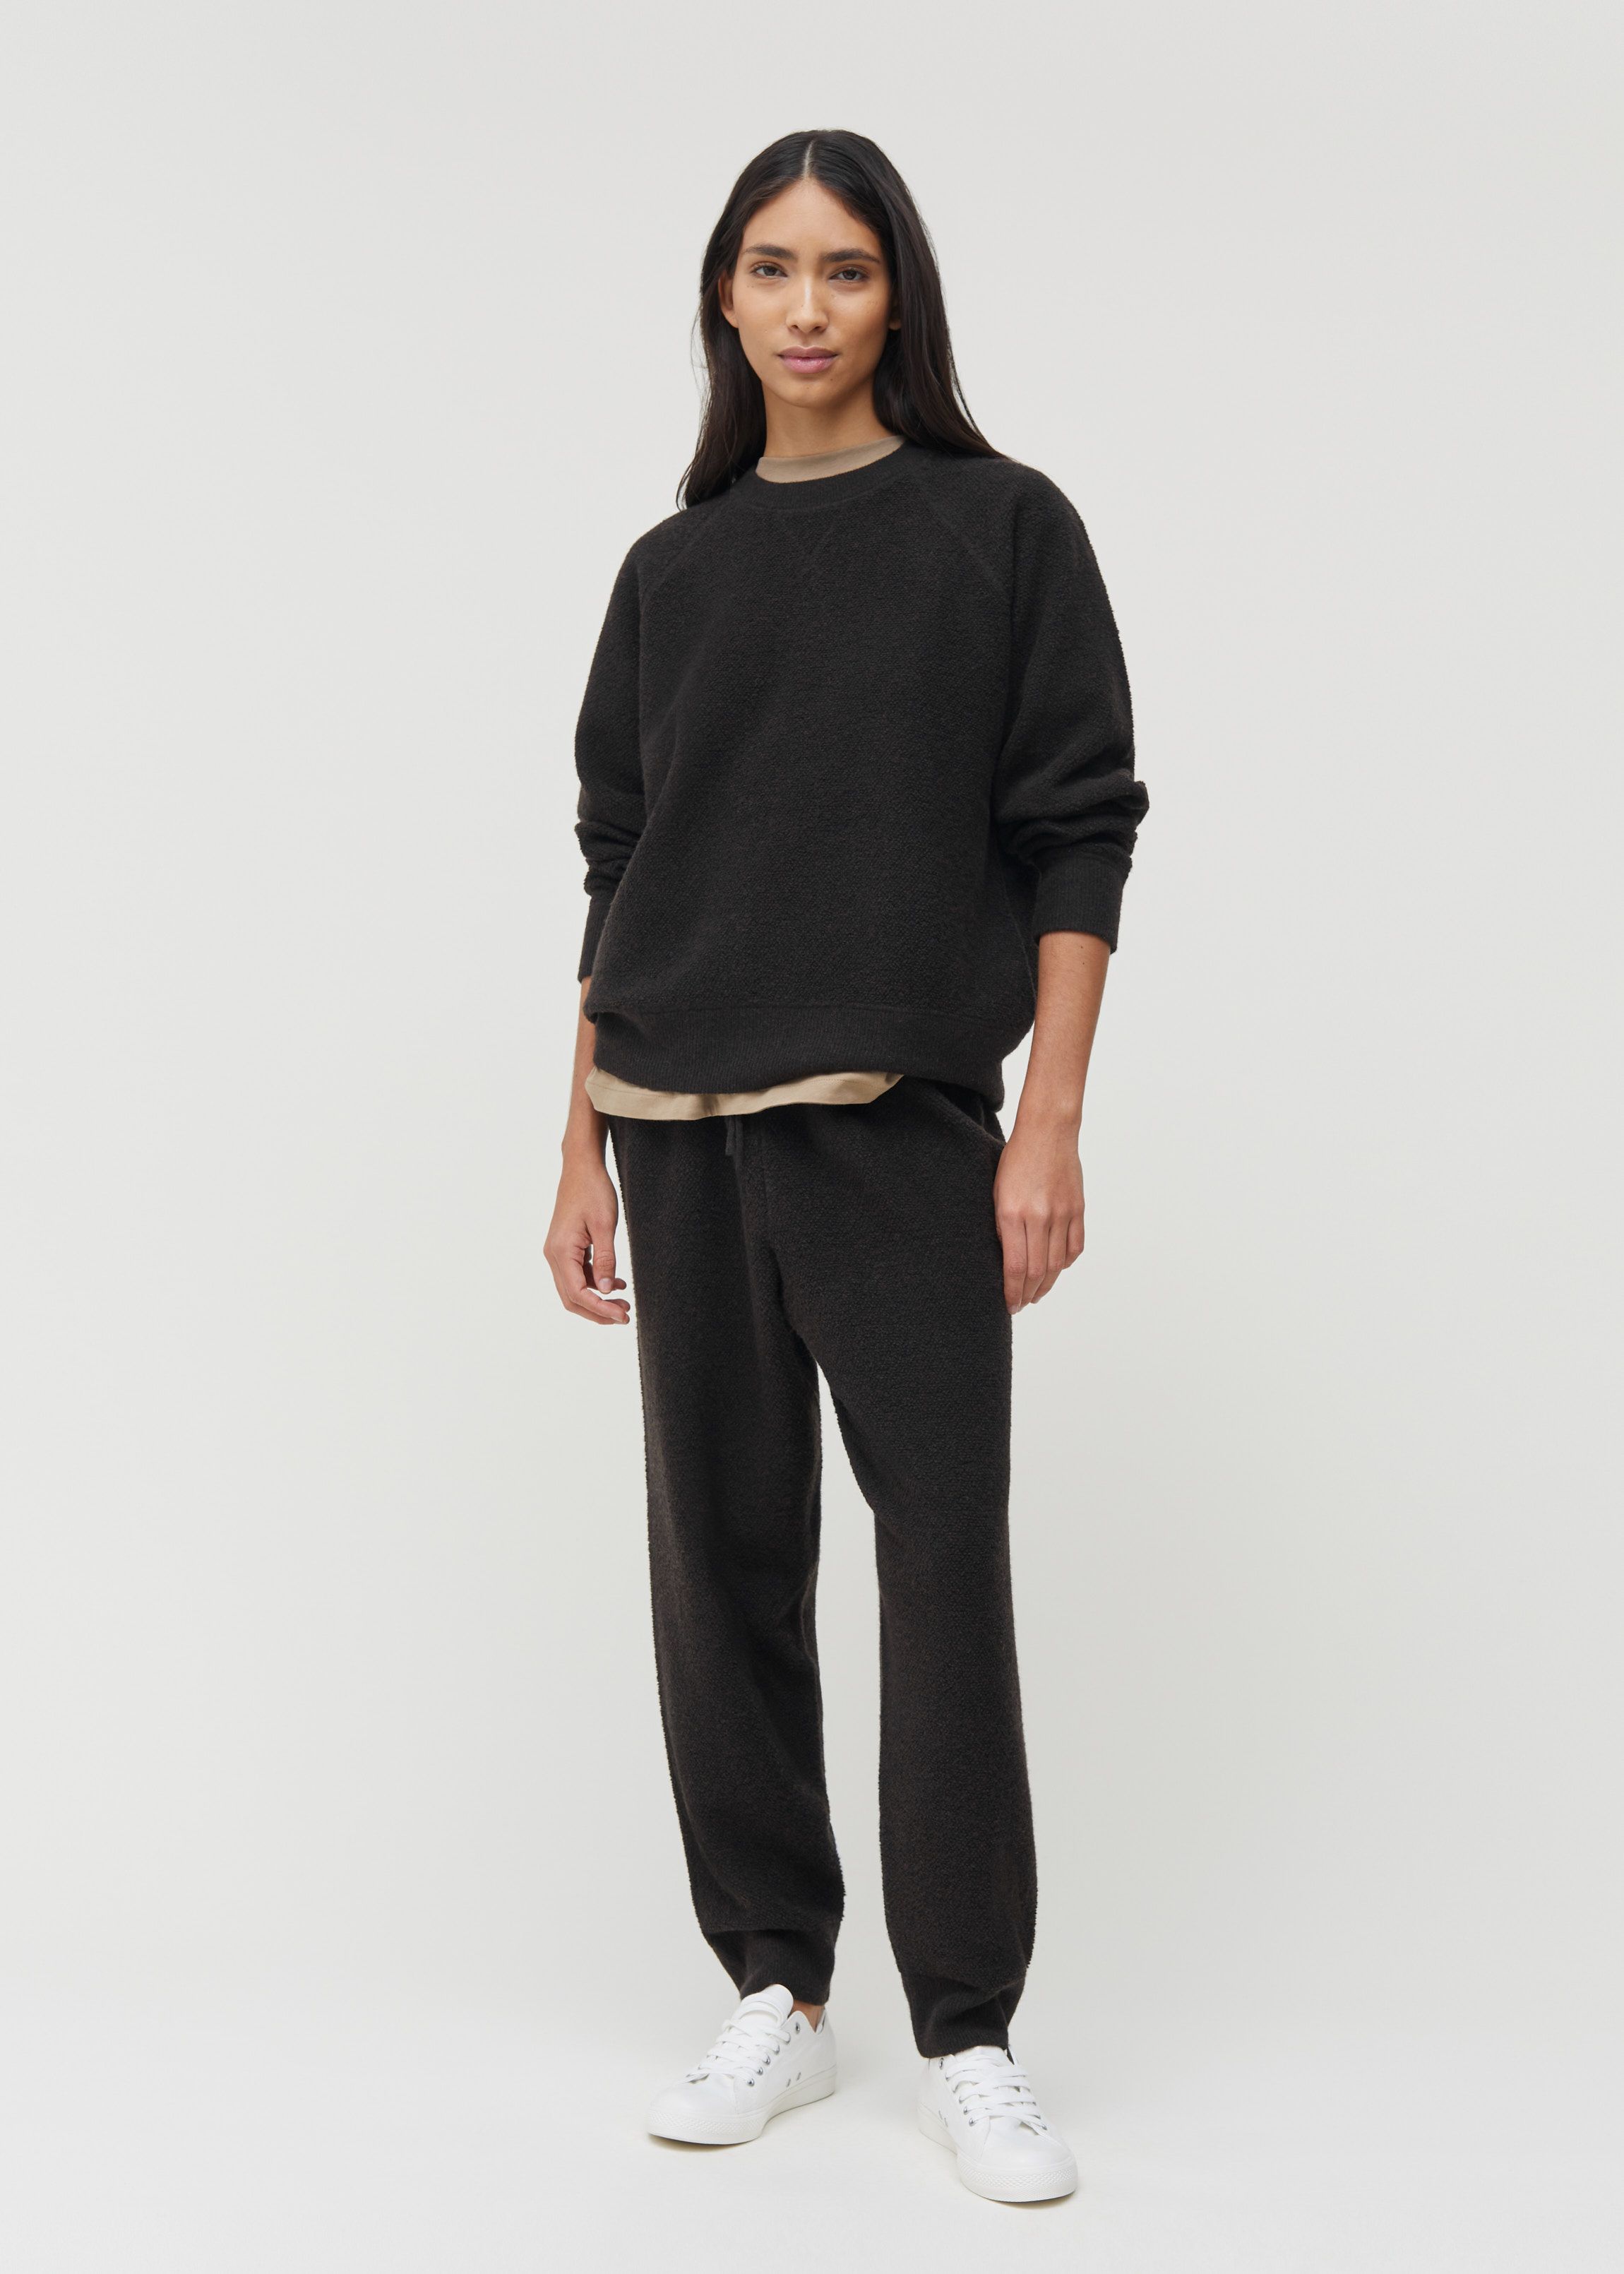 New Arrivals - Loungewear - Carl knitted sweatpants